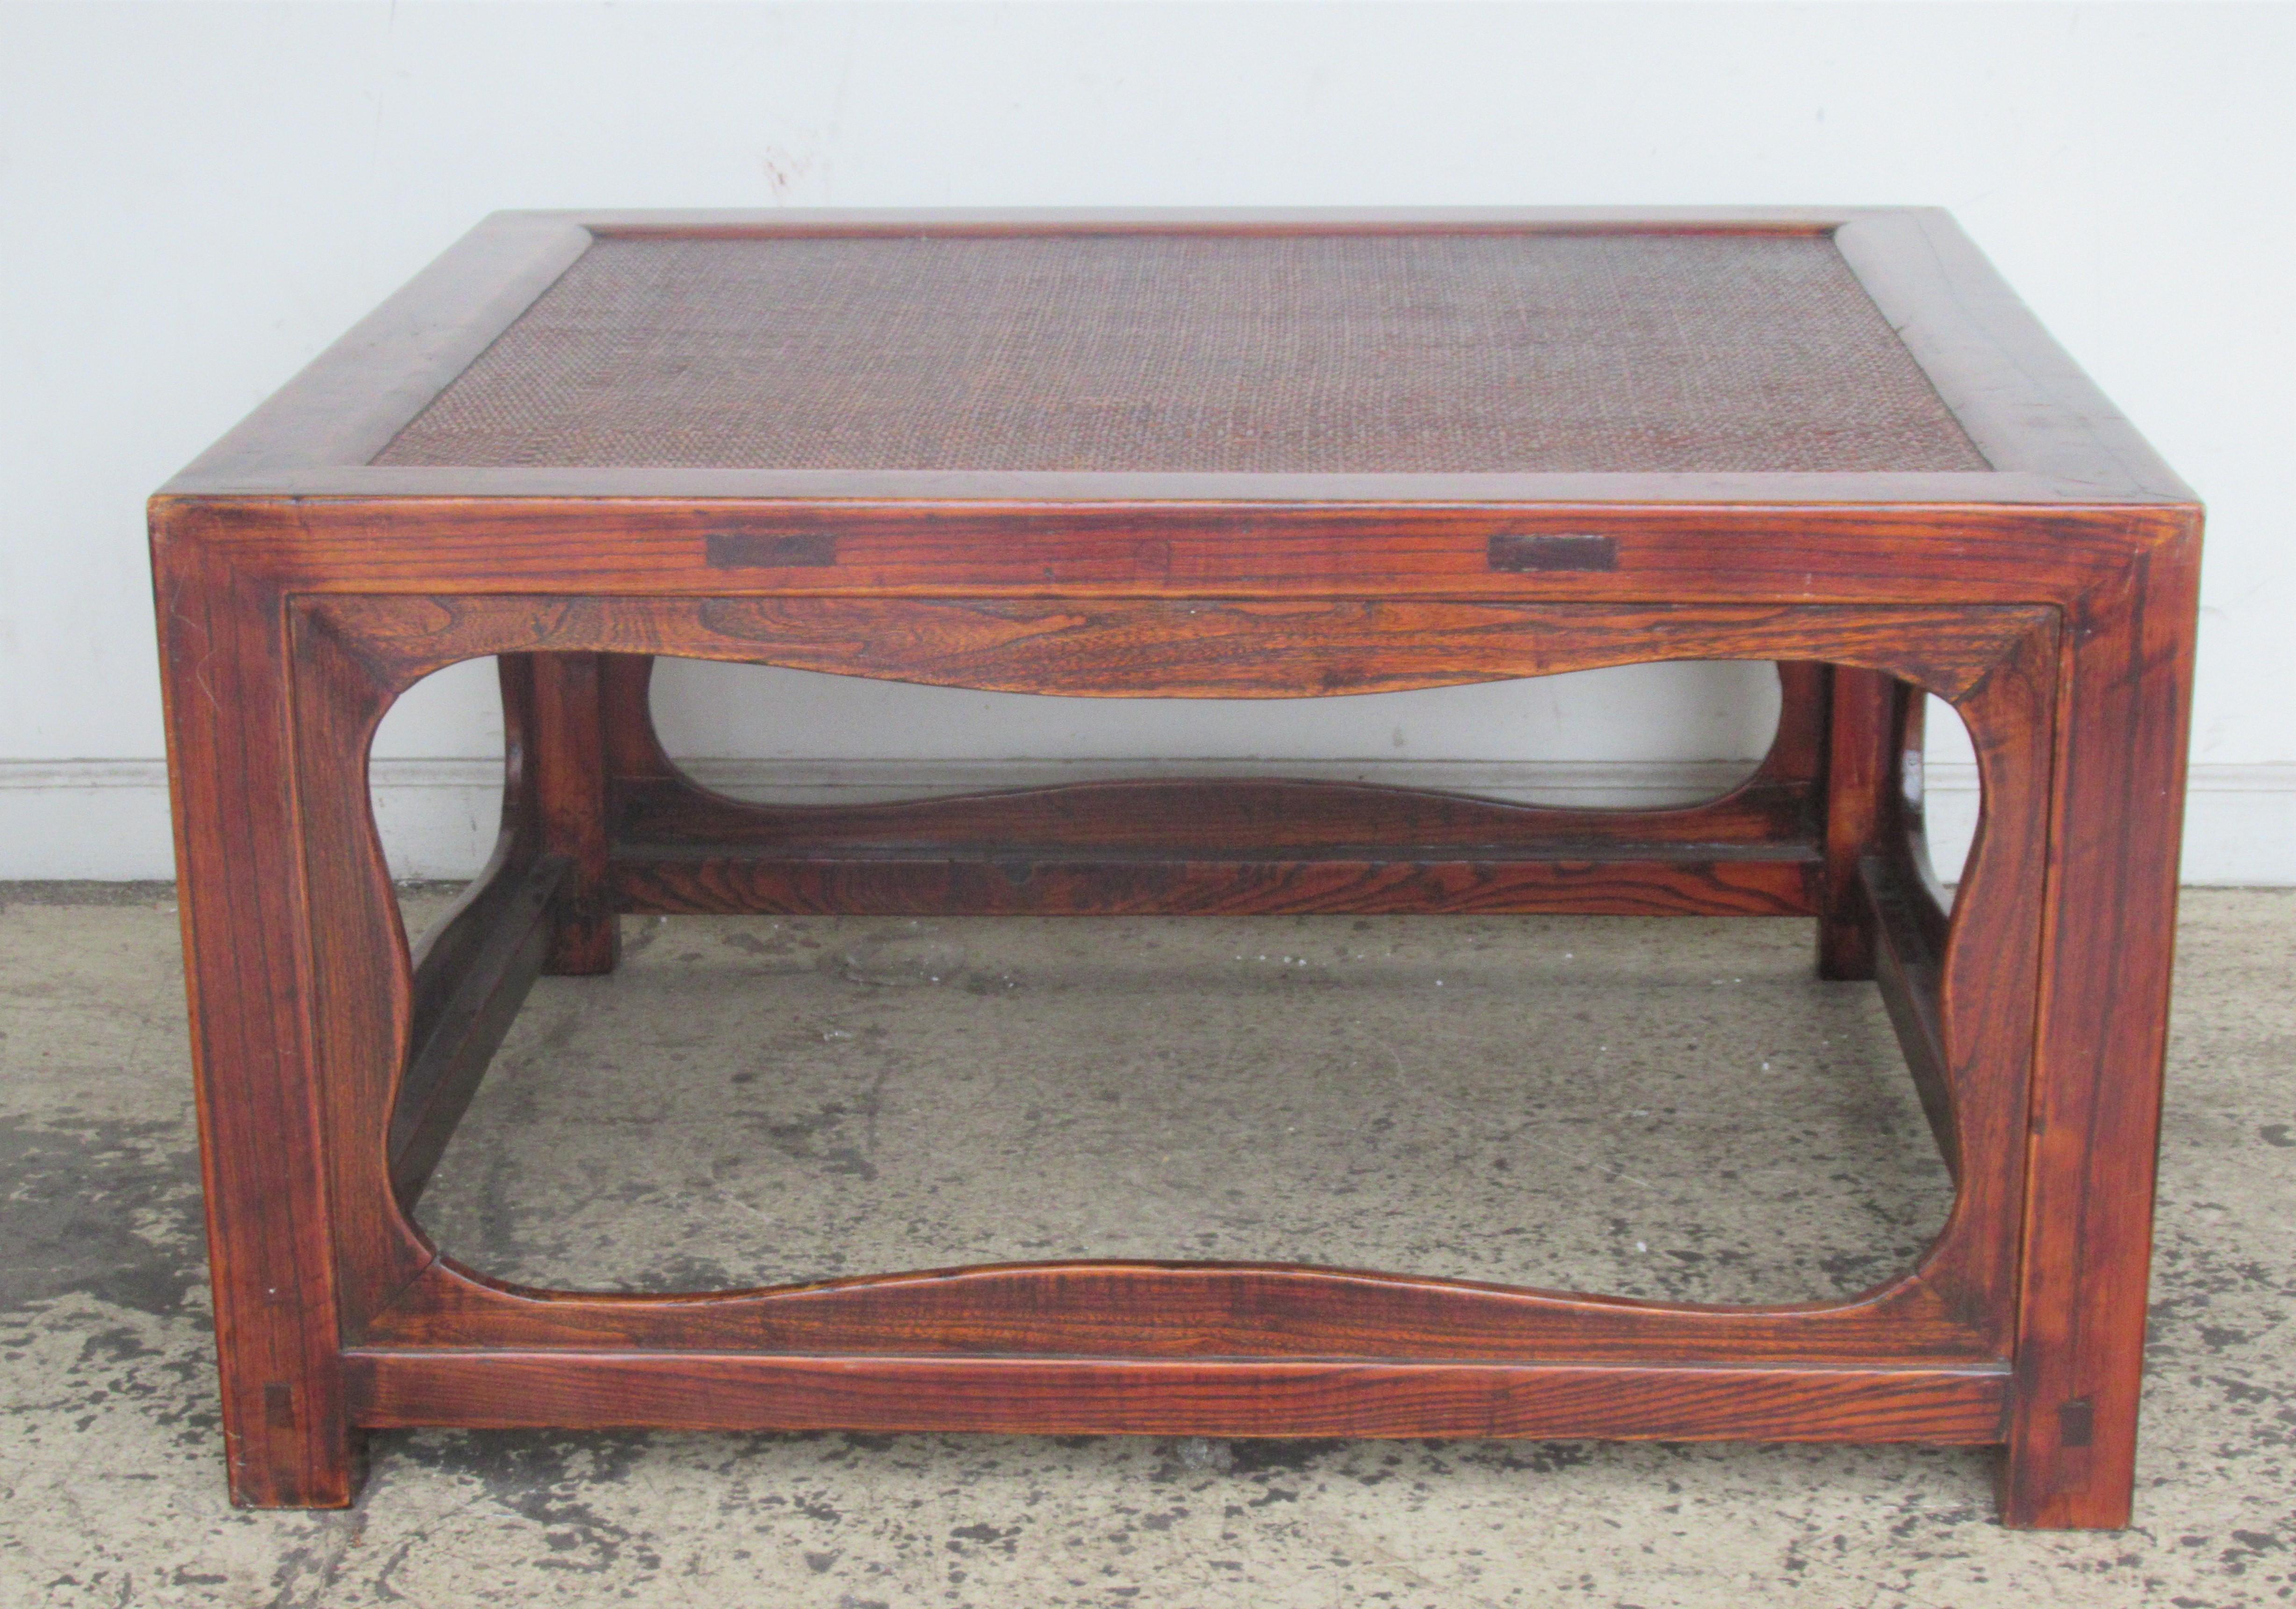 Antique Chinese carved elm coffee table w/ inset cane top. Rich natural grain to elm wood with overall beautifully aged glowing surface color to original finish, circa 1900. Great looking table. Look at all pictures and read condition report in